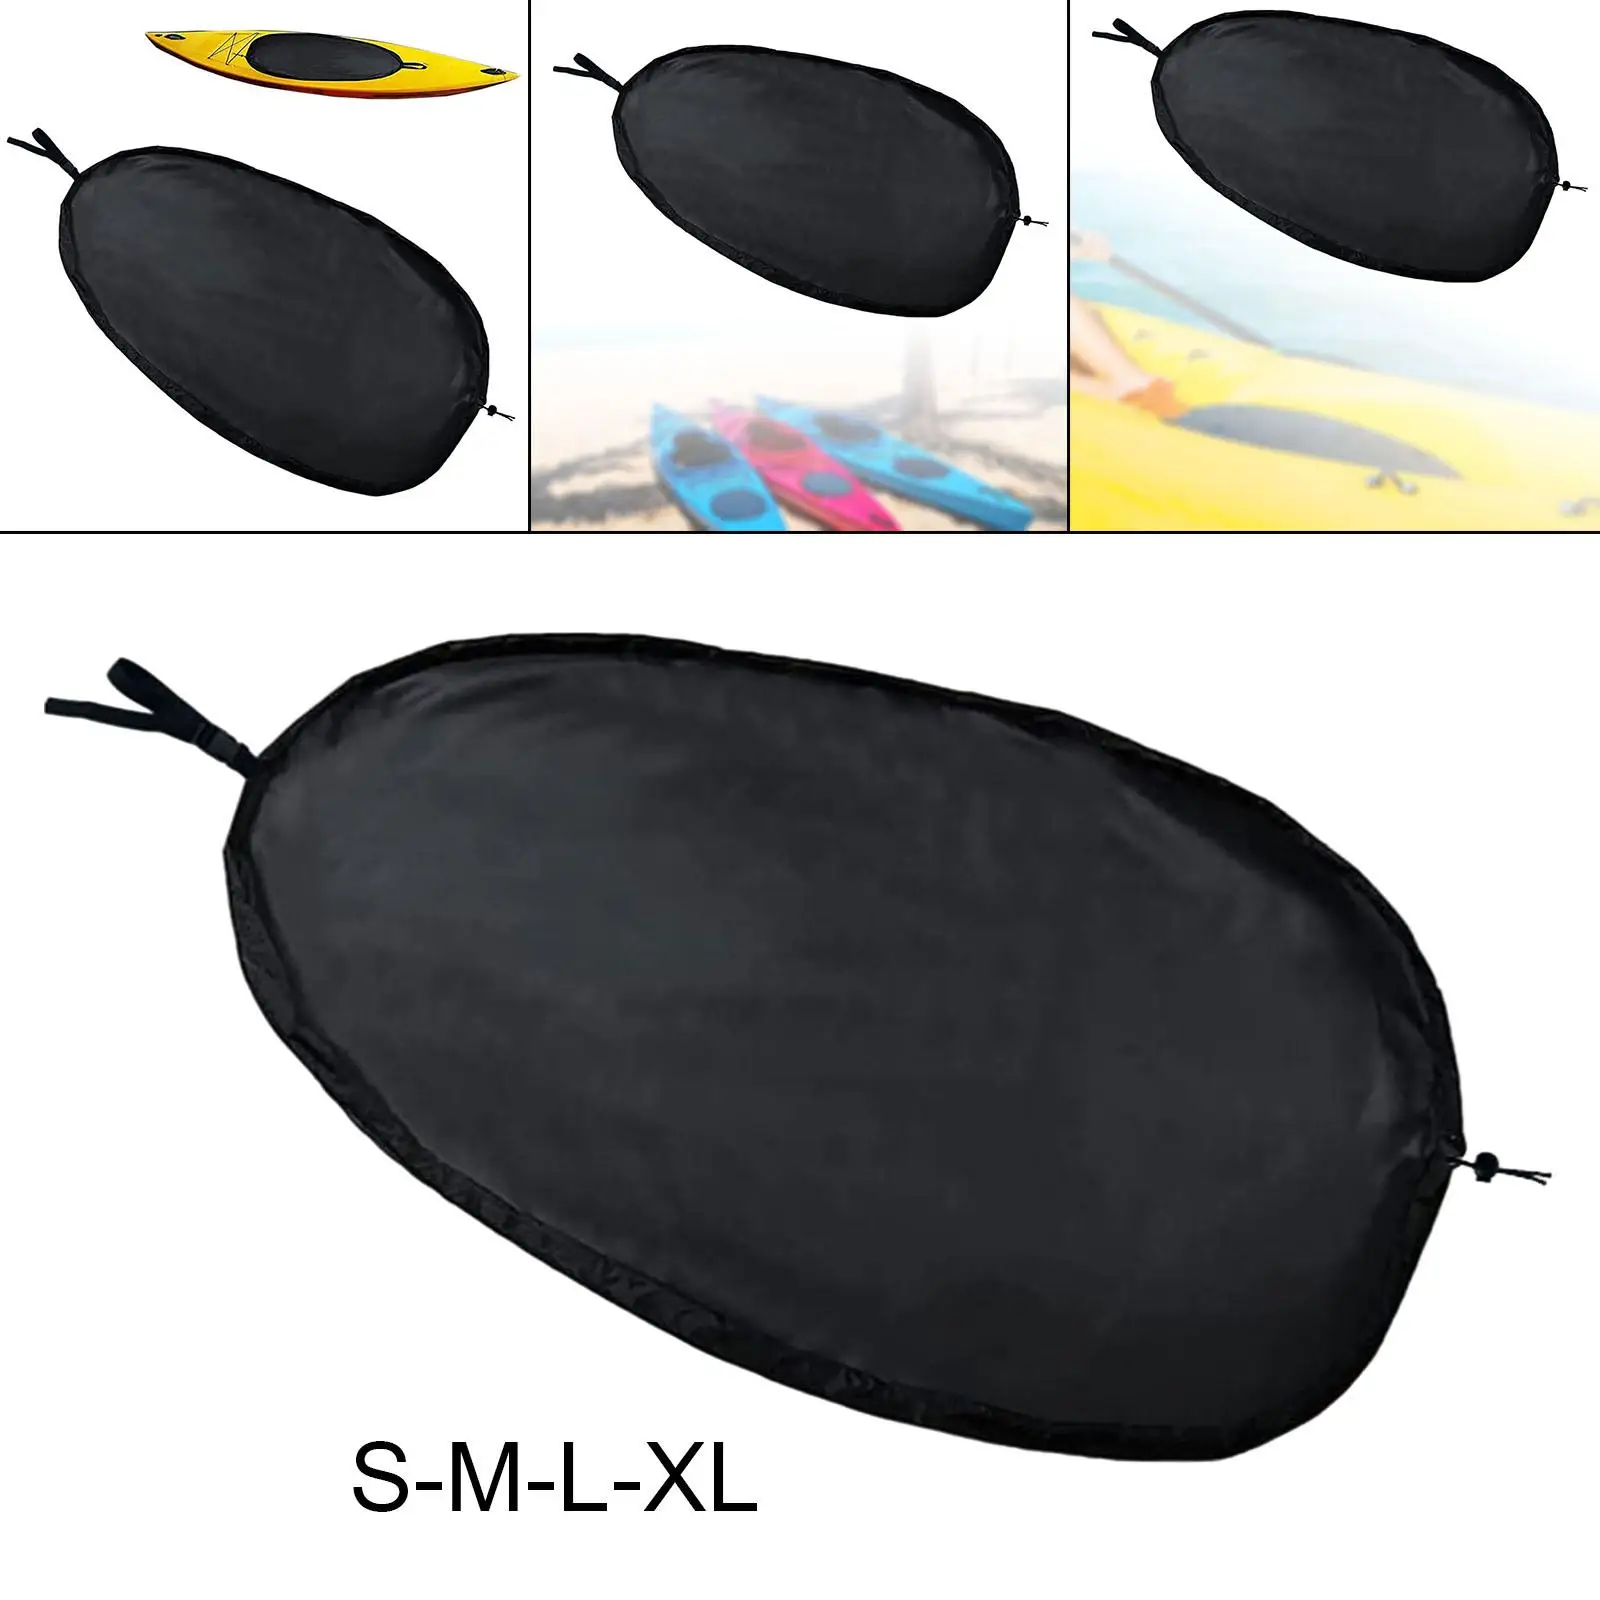 Universal Kayak Cockpit Cover Protection Water Resistance Oxford Cloth Dust Cover Kayak Seat Cover for Fishing Kayak